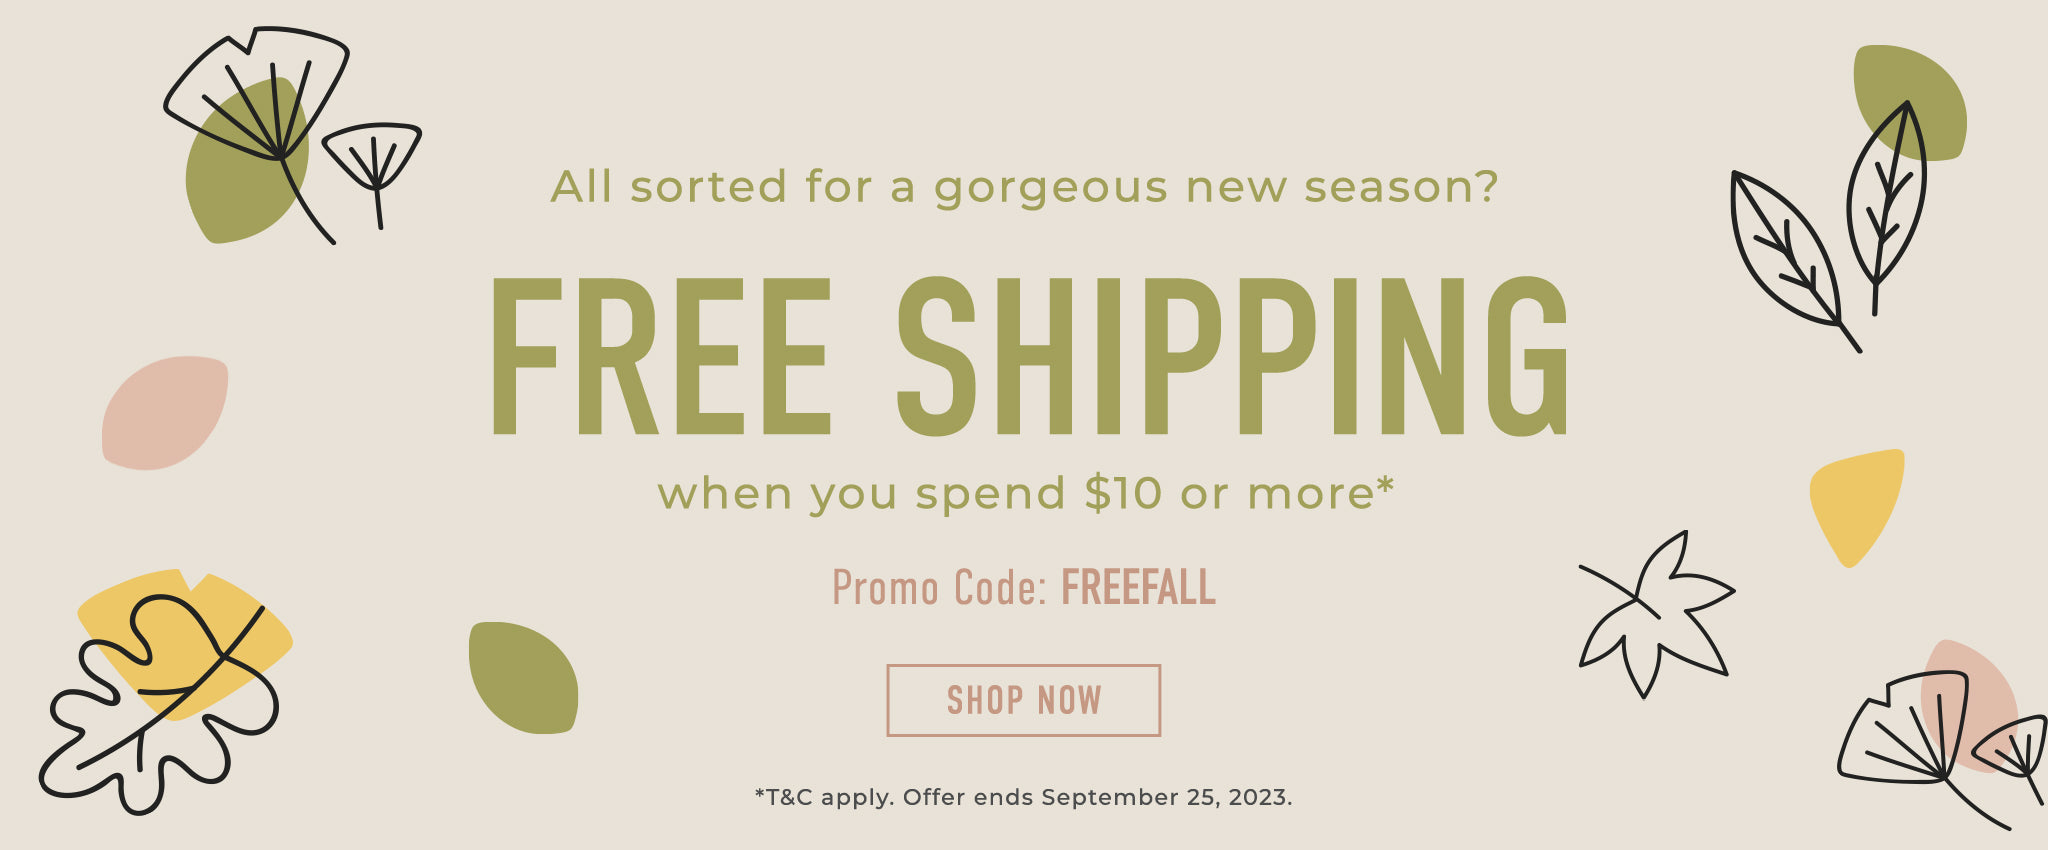 Free Shipping when you spend $10 or more with code: FREEFALL